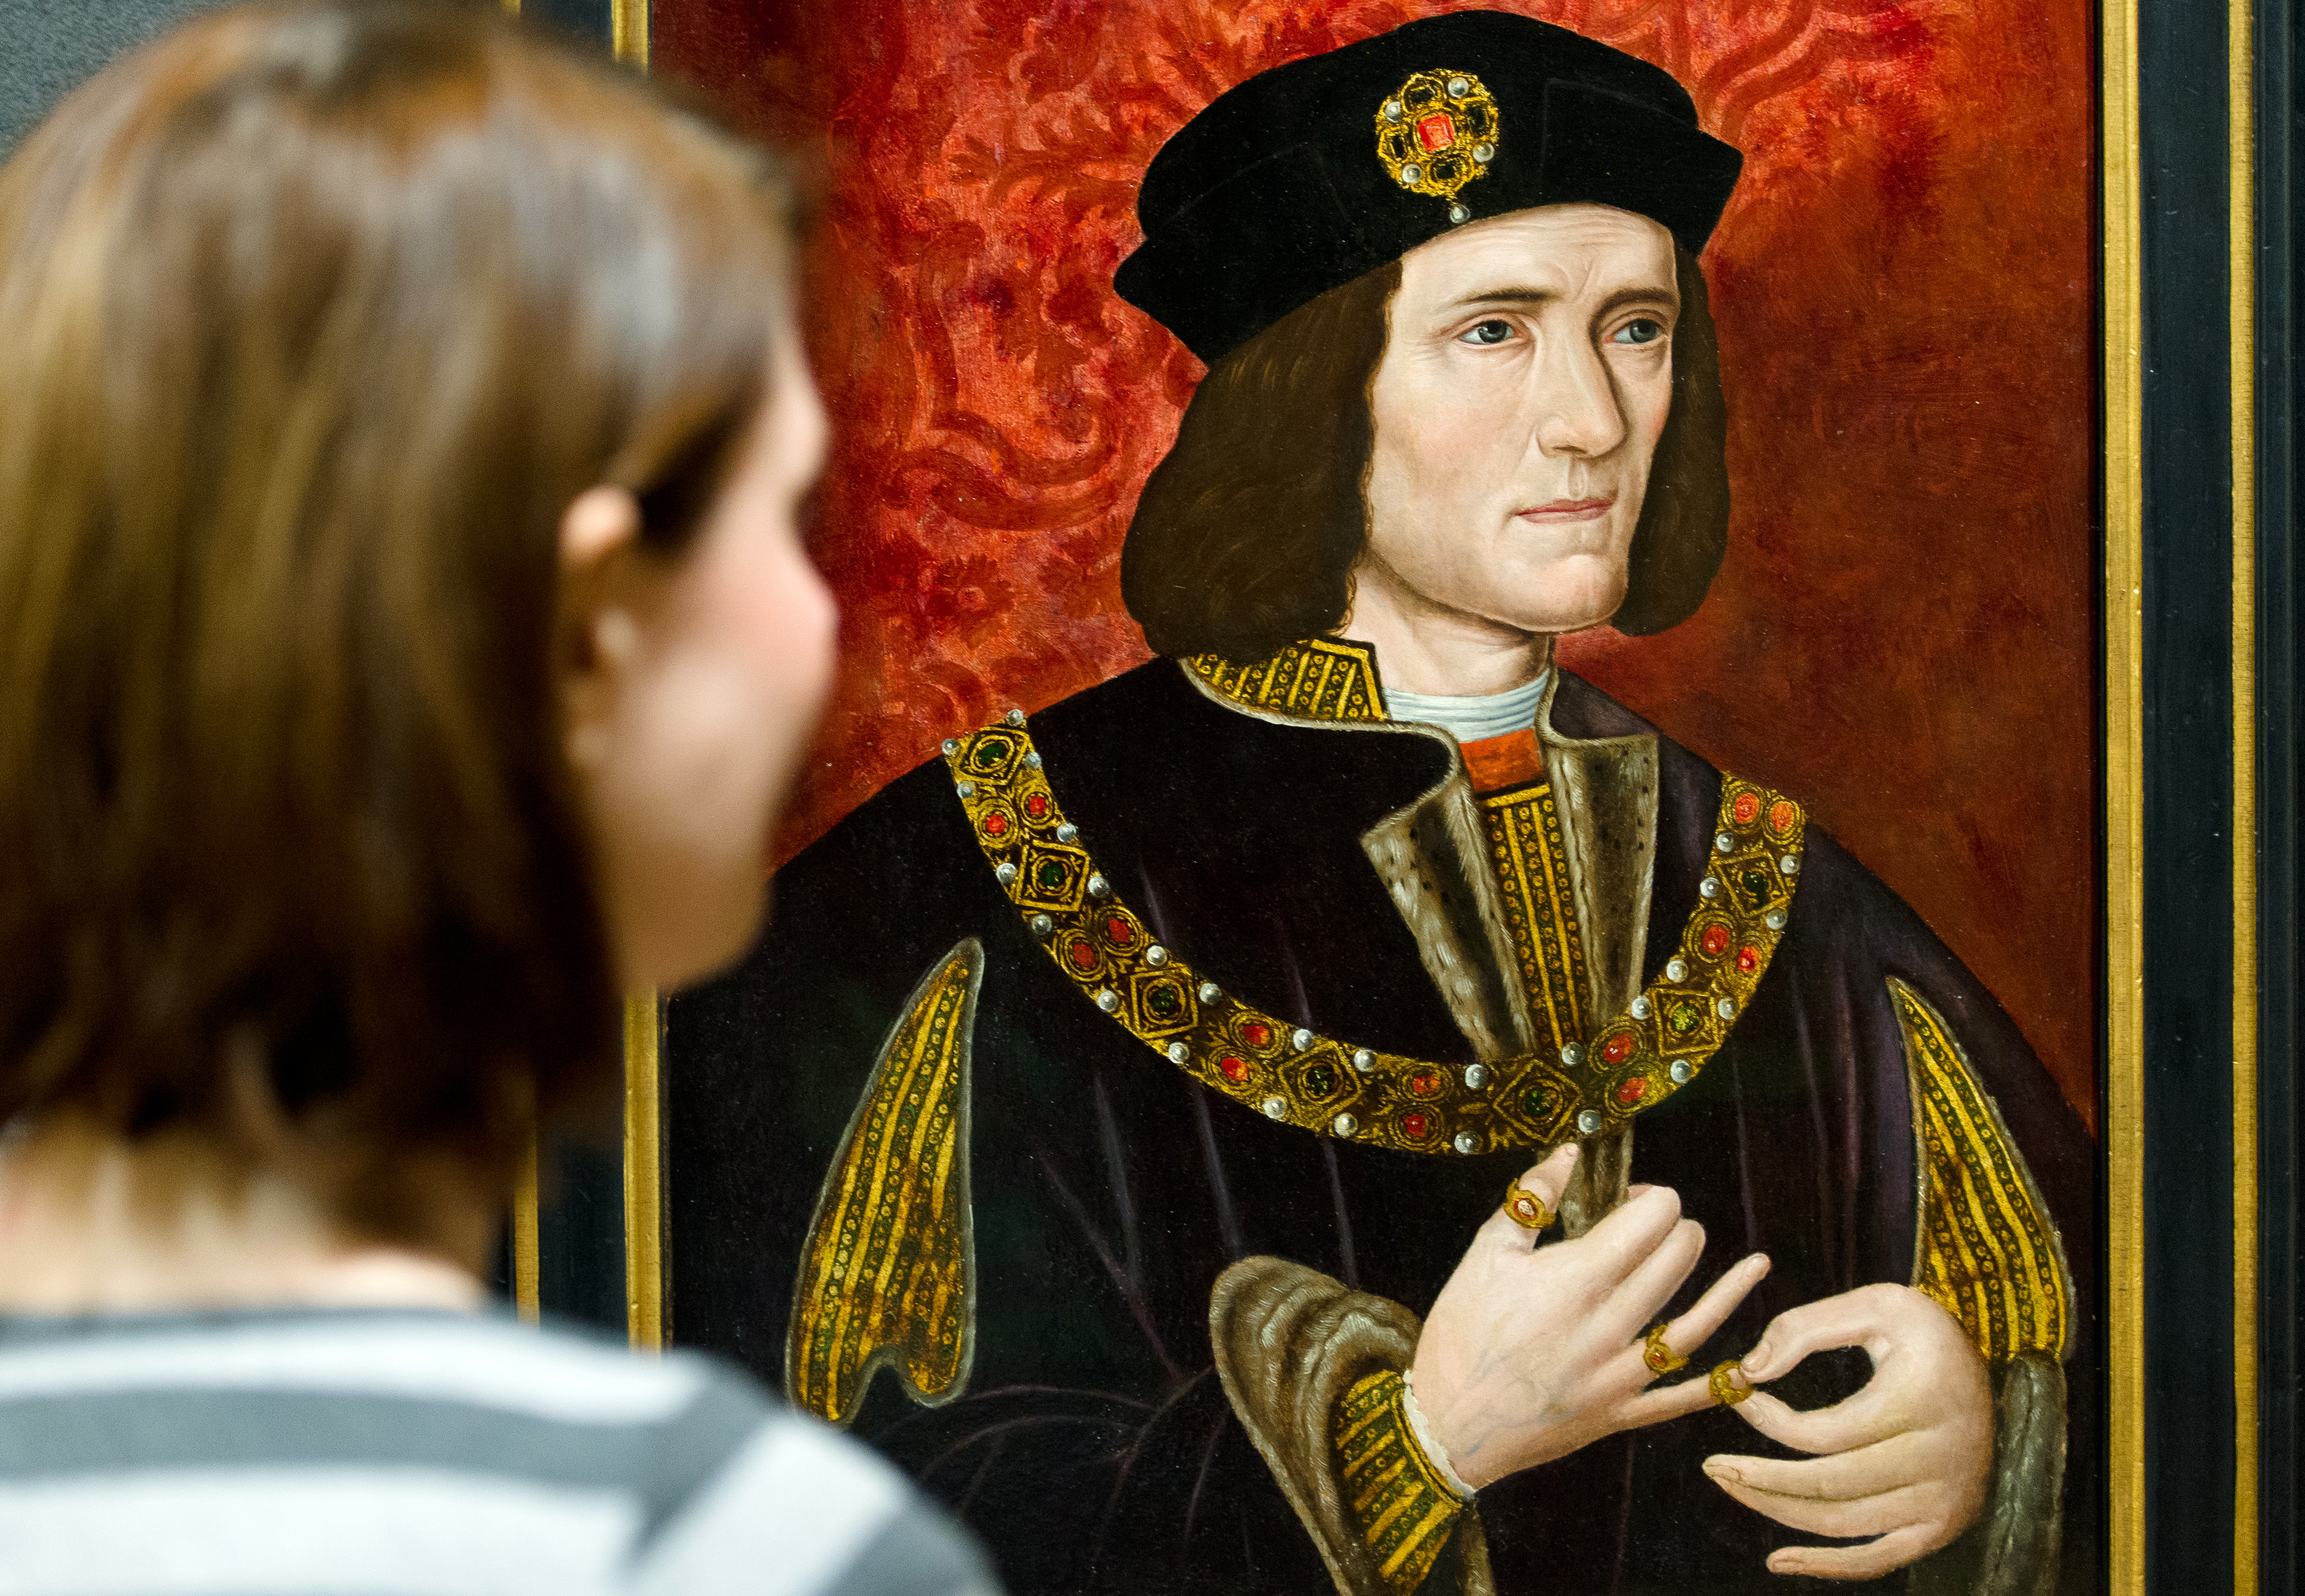 A painting of Britain's King Richard III by an unknown artist is displayed in the National Portrait Gallery in central London on January 25, 2013. (Leon Neal—AFP/Getty Images)